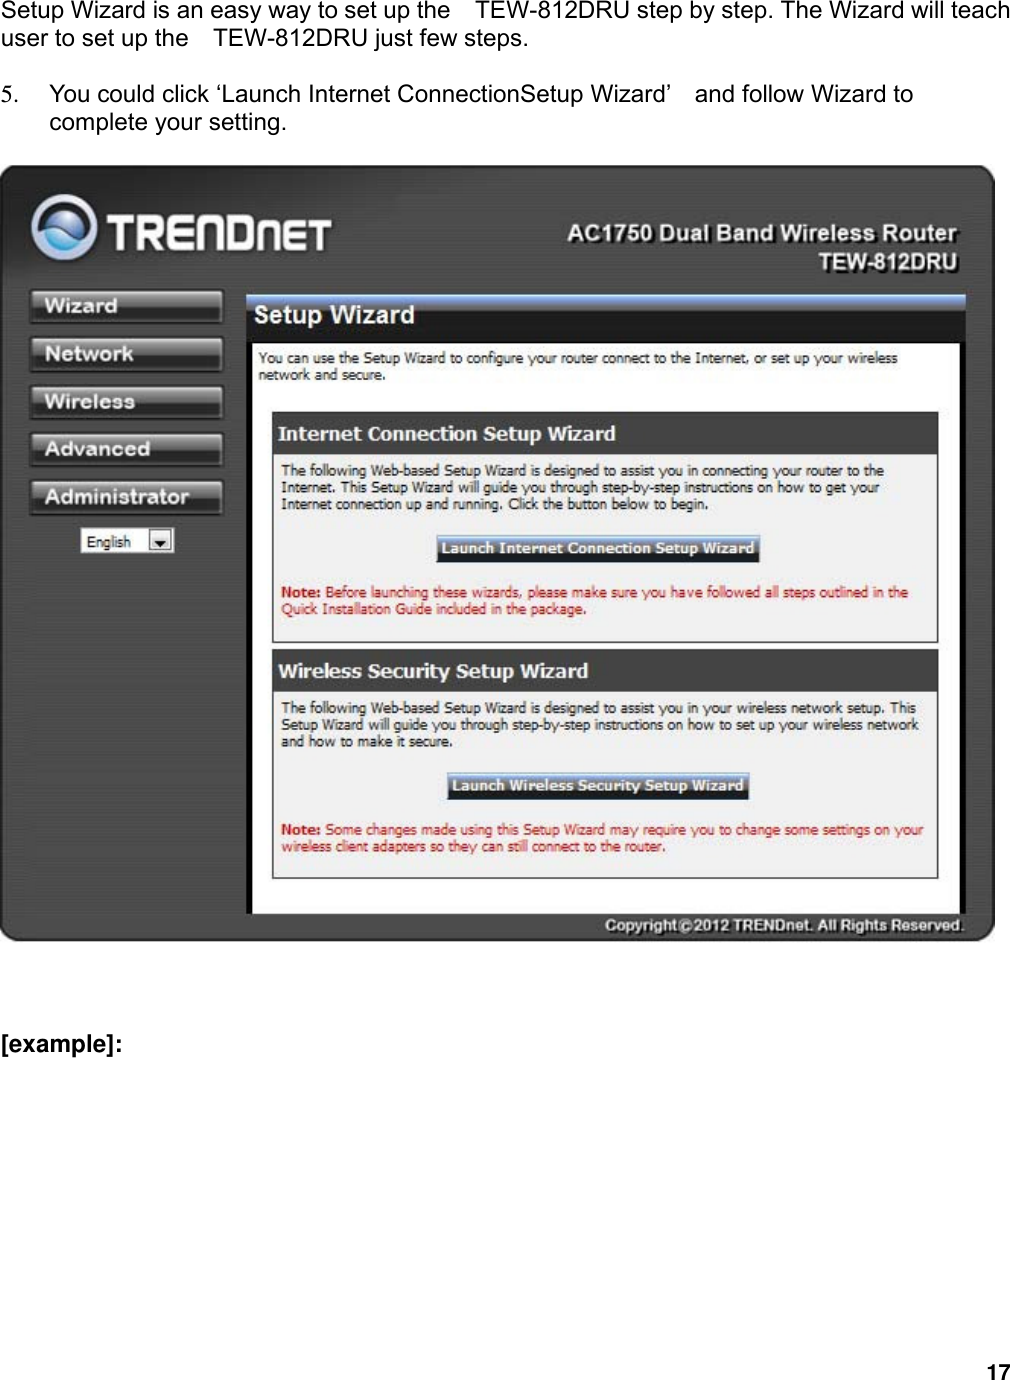 17  Setup Wizard is an easy way to set up the    TEW-812DRU step by step. The Wizard will teach user to set up the    TEW-812DRU just few steps.  5.  You could click ‘Launch Internet ConnectionSetup Wizard’    and follow Wizard to complete your setting.     [example]:  